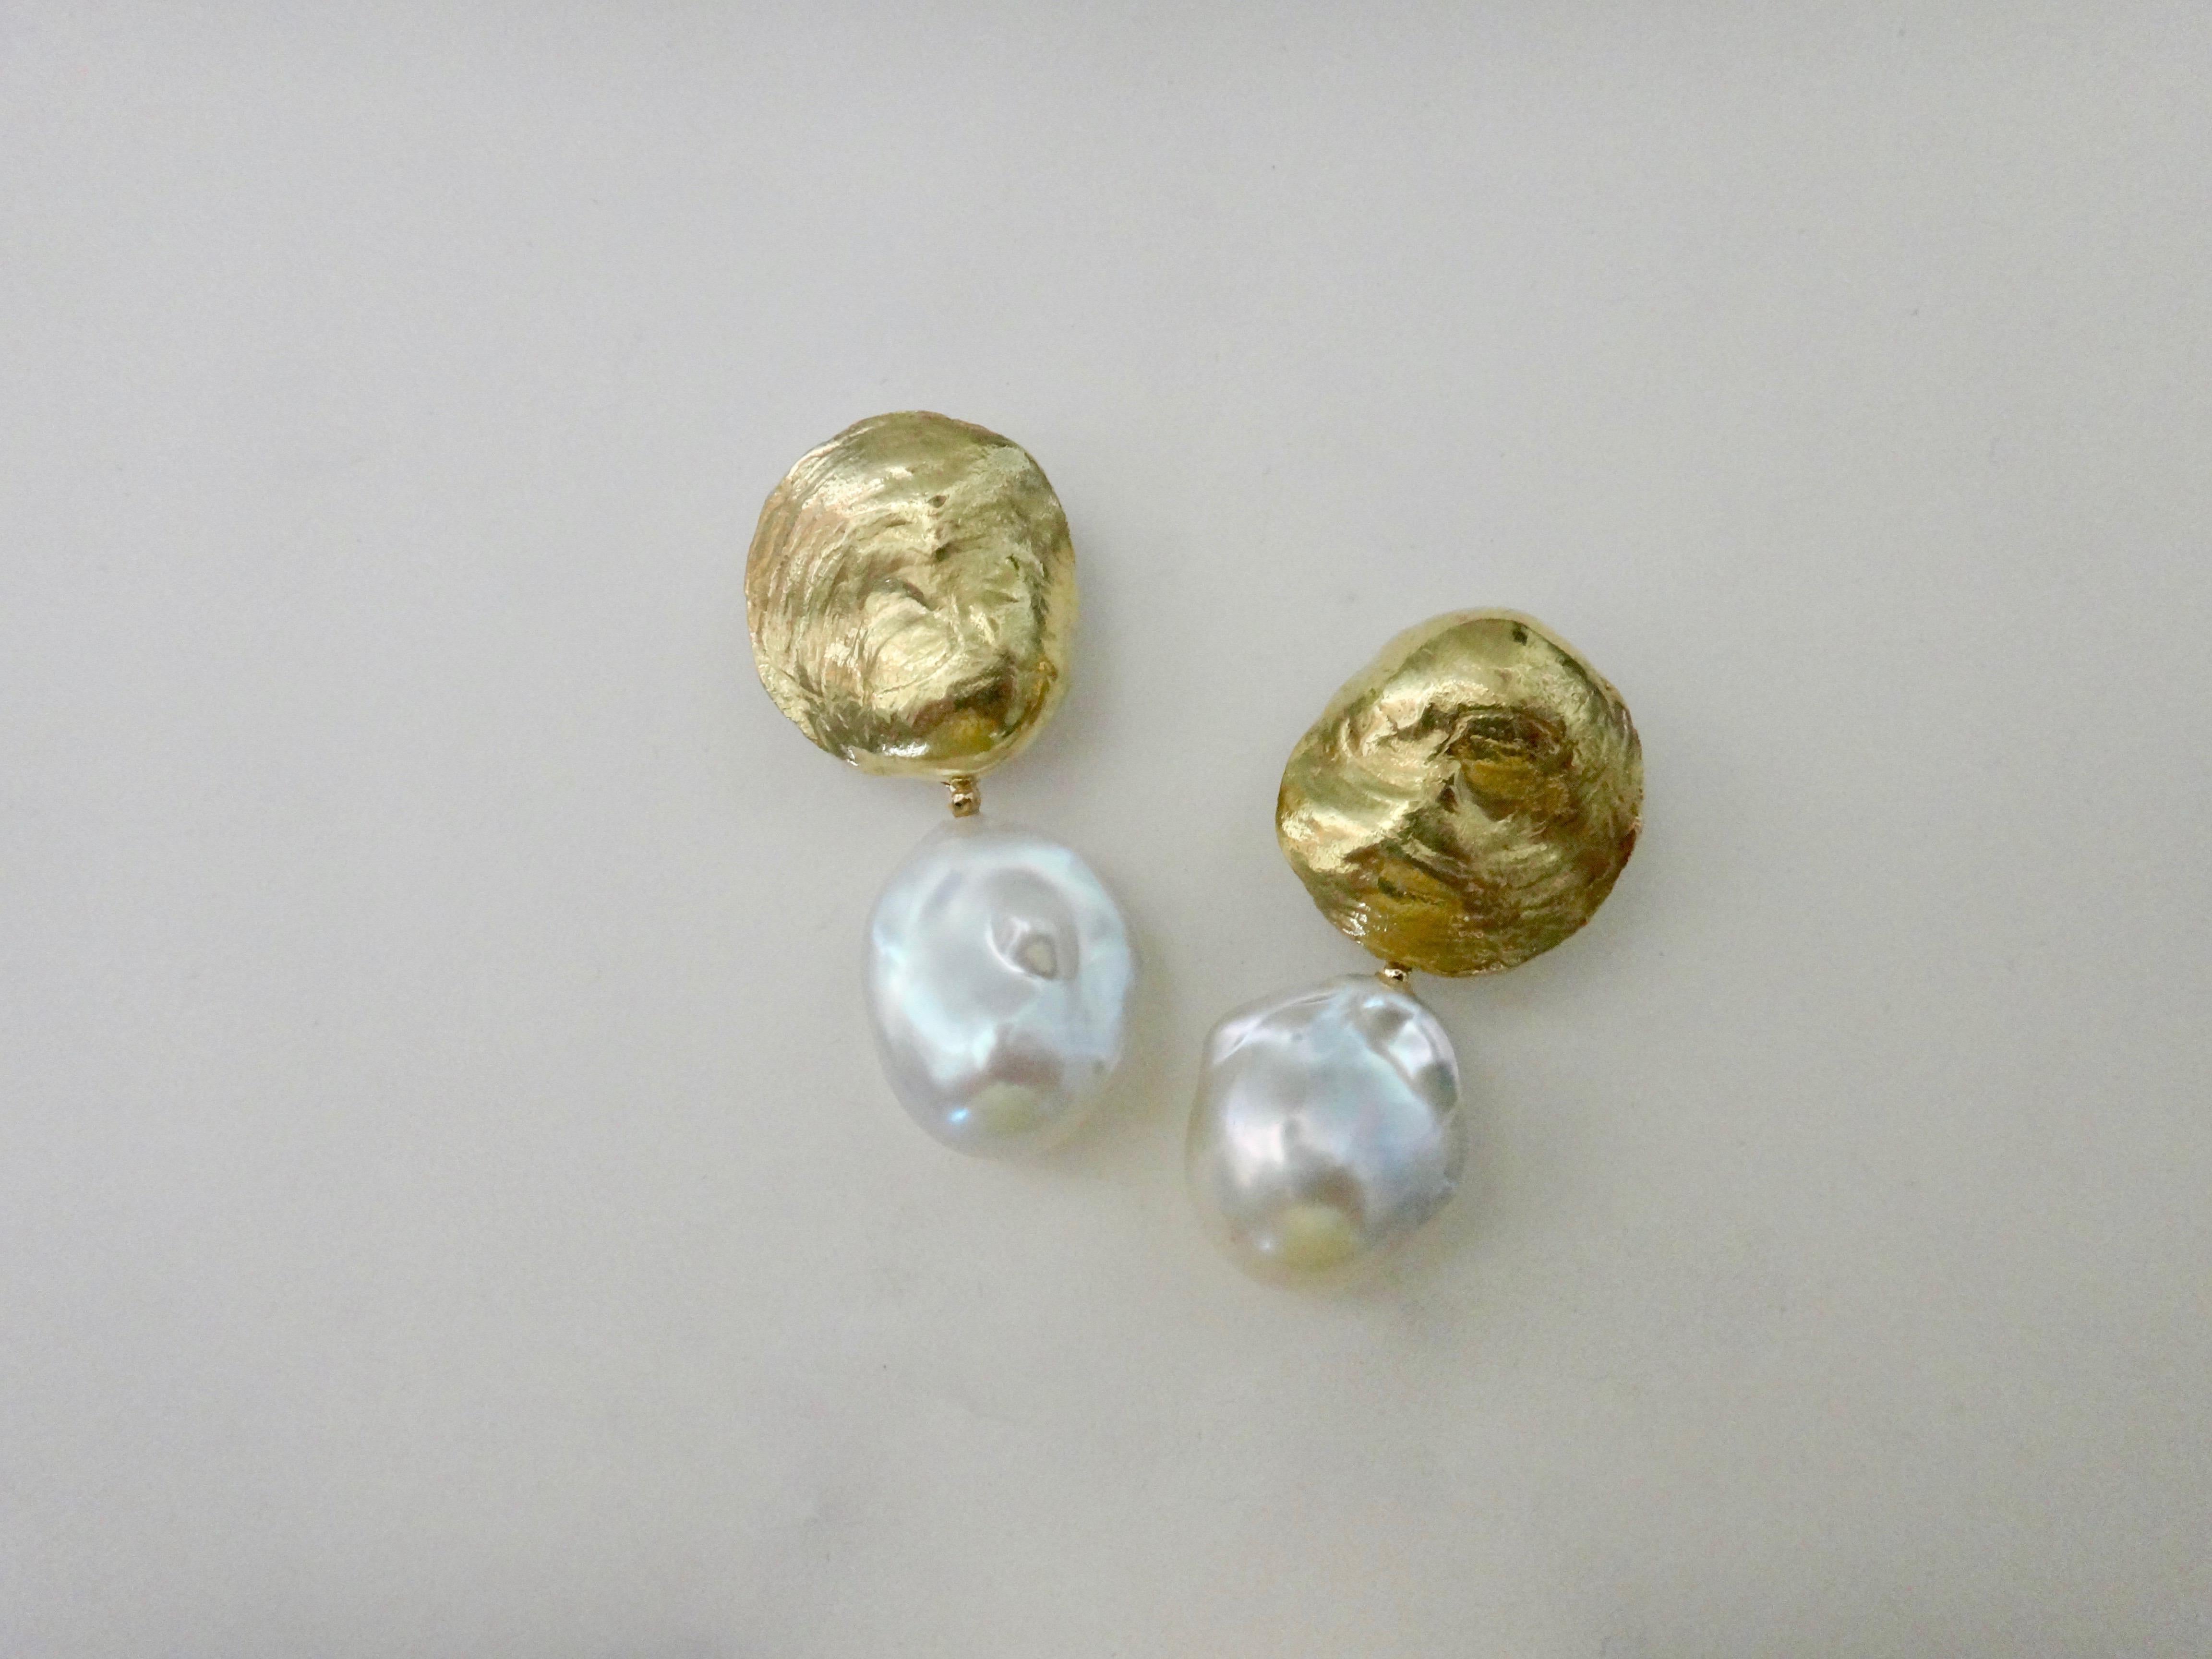 Offered here are these Jingle shell earrings with removable white baroque pearl drops.  